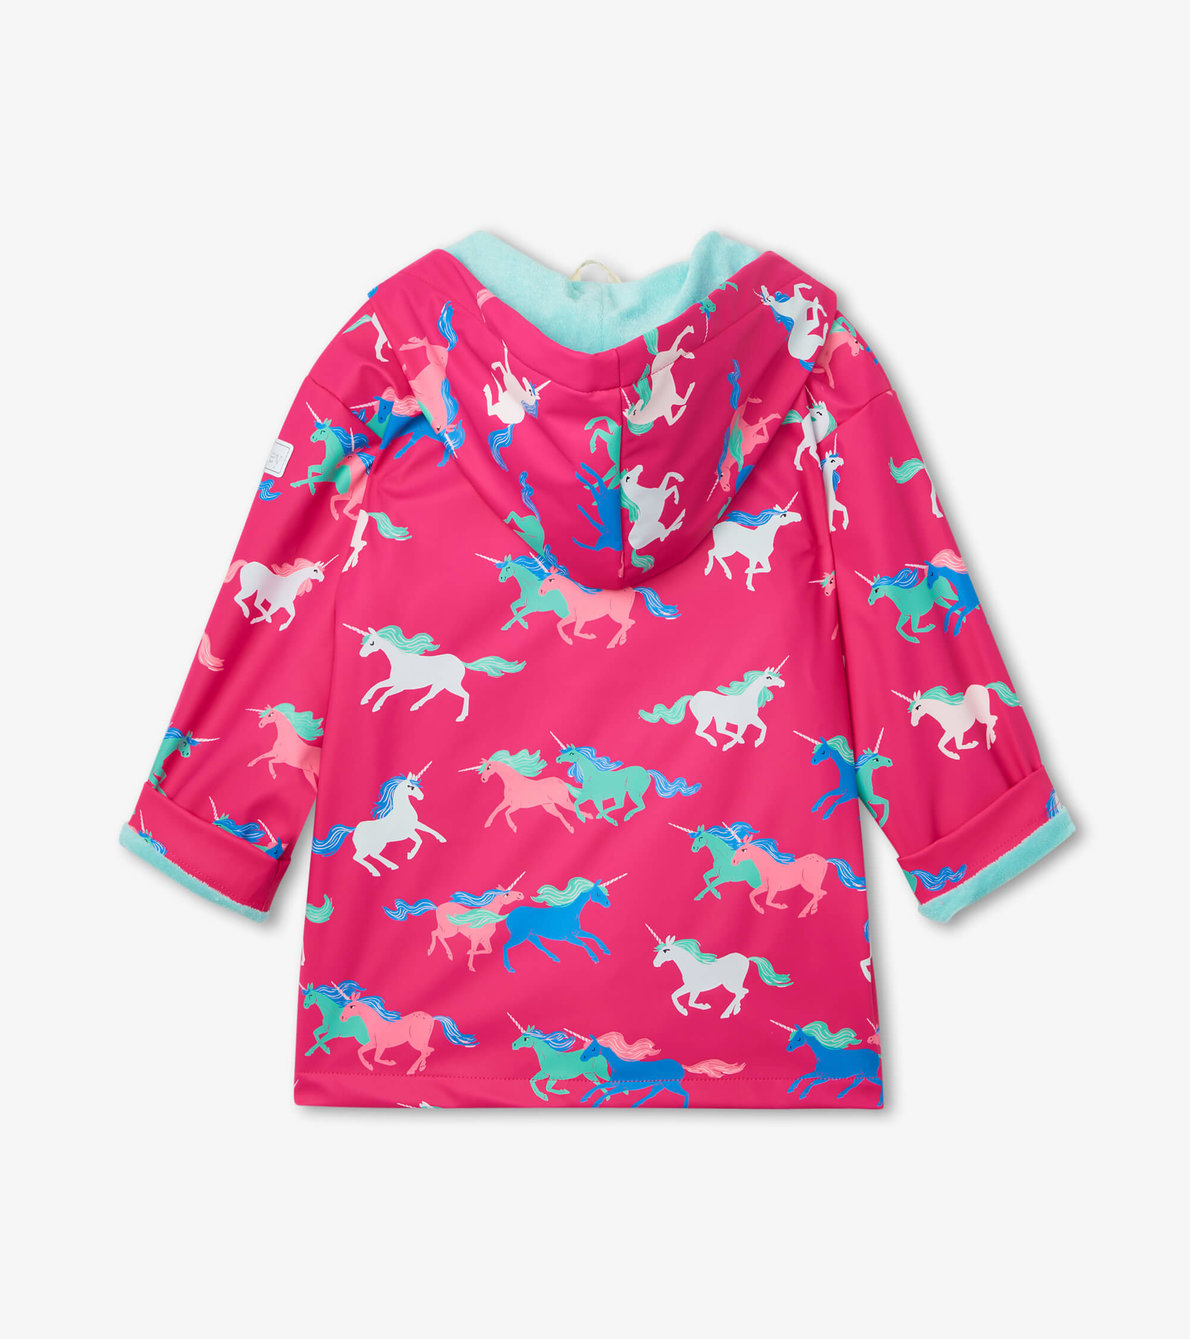 View larger image of Frolicking Unicorns Colour Changing Raincoat